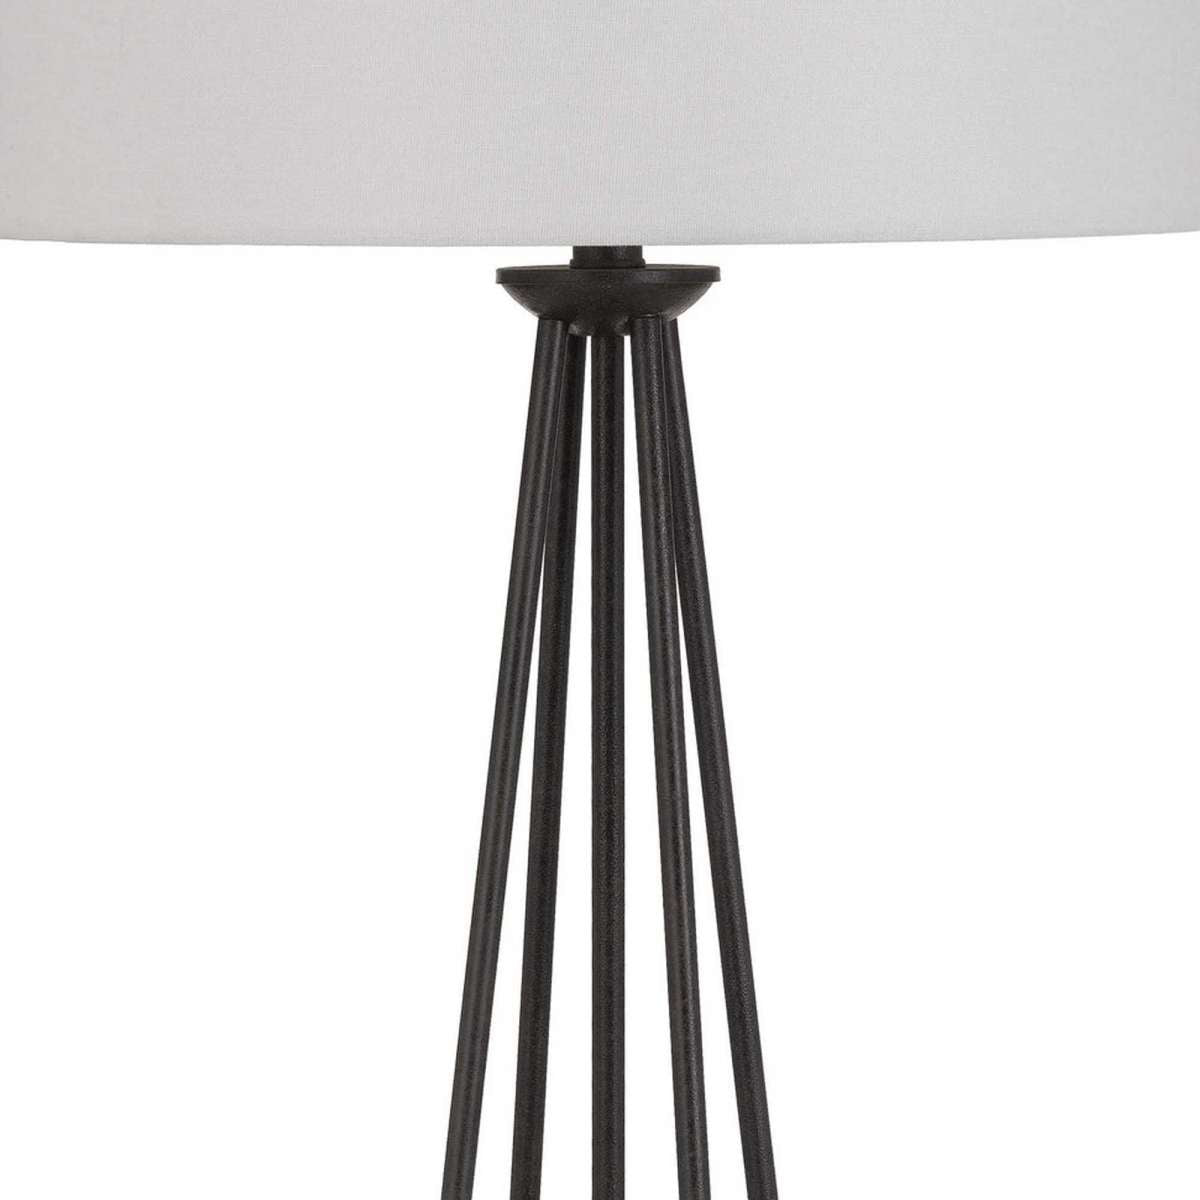 31.25" Metal Table Lamp With Drum Style Shade, Black And Brown By Benzara